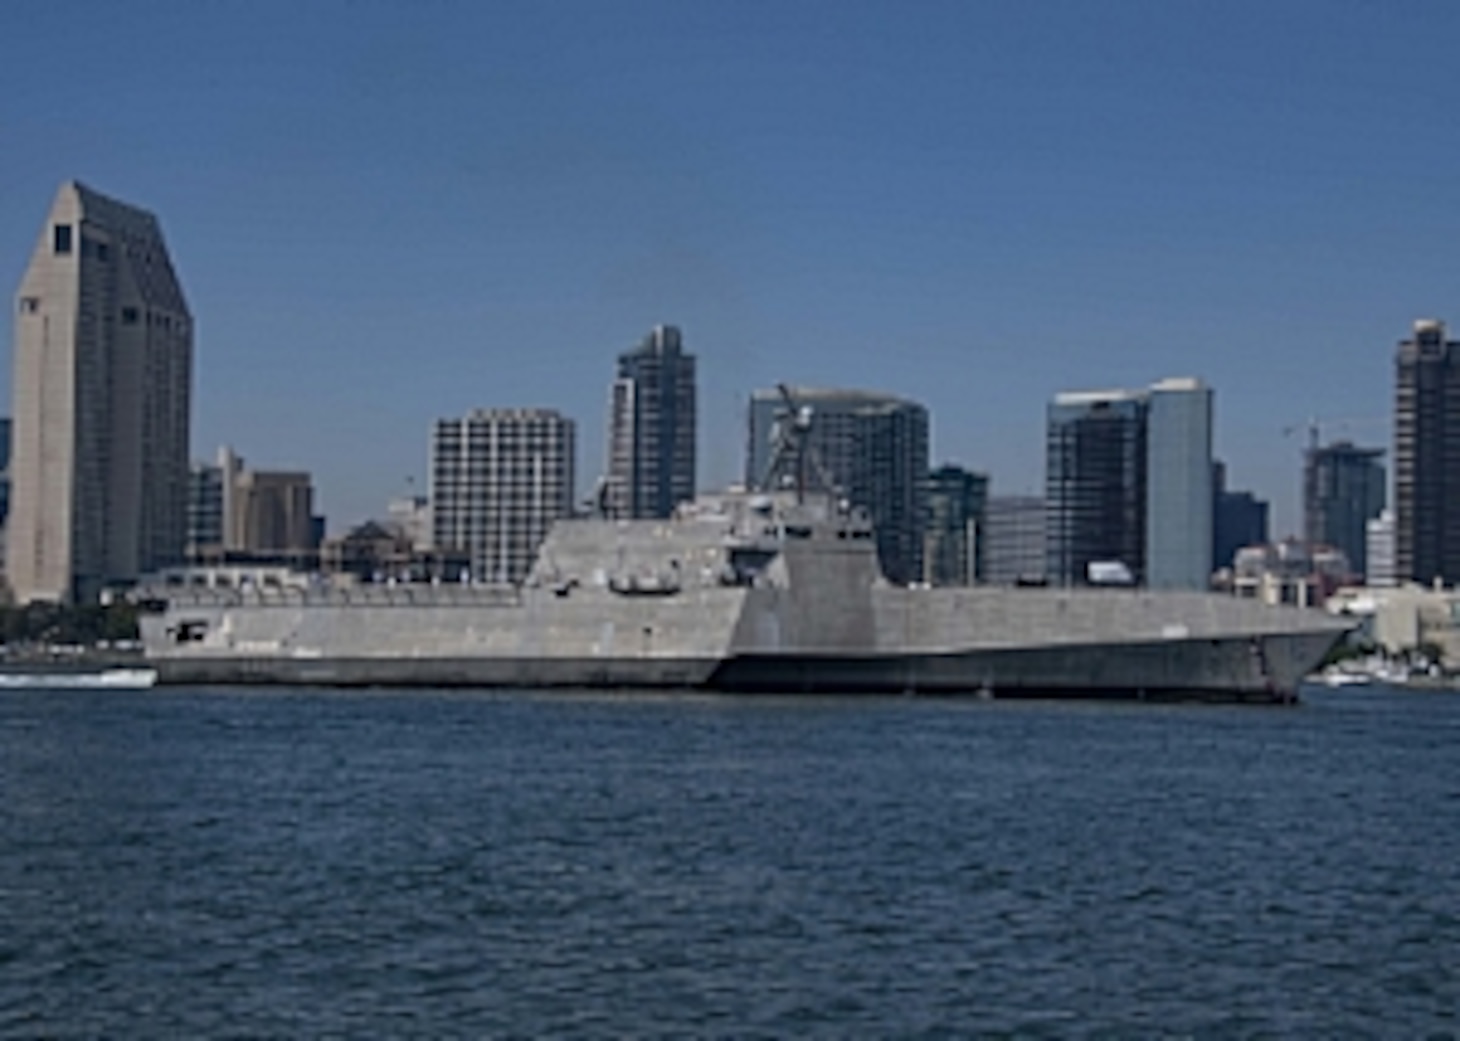 USS Montgomery LCS-8 Littoral Combat Ship US Navy | atelier-yuwa.ciao.jp